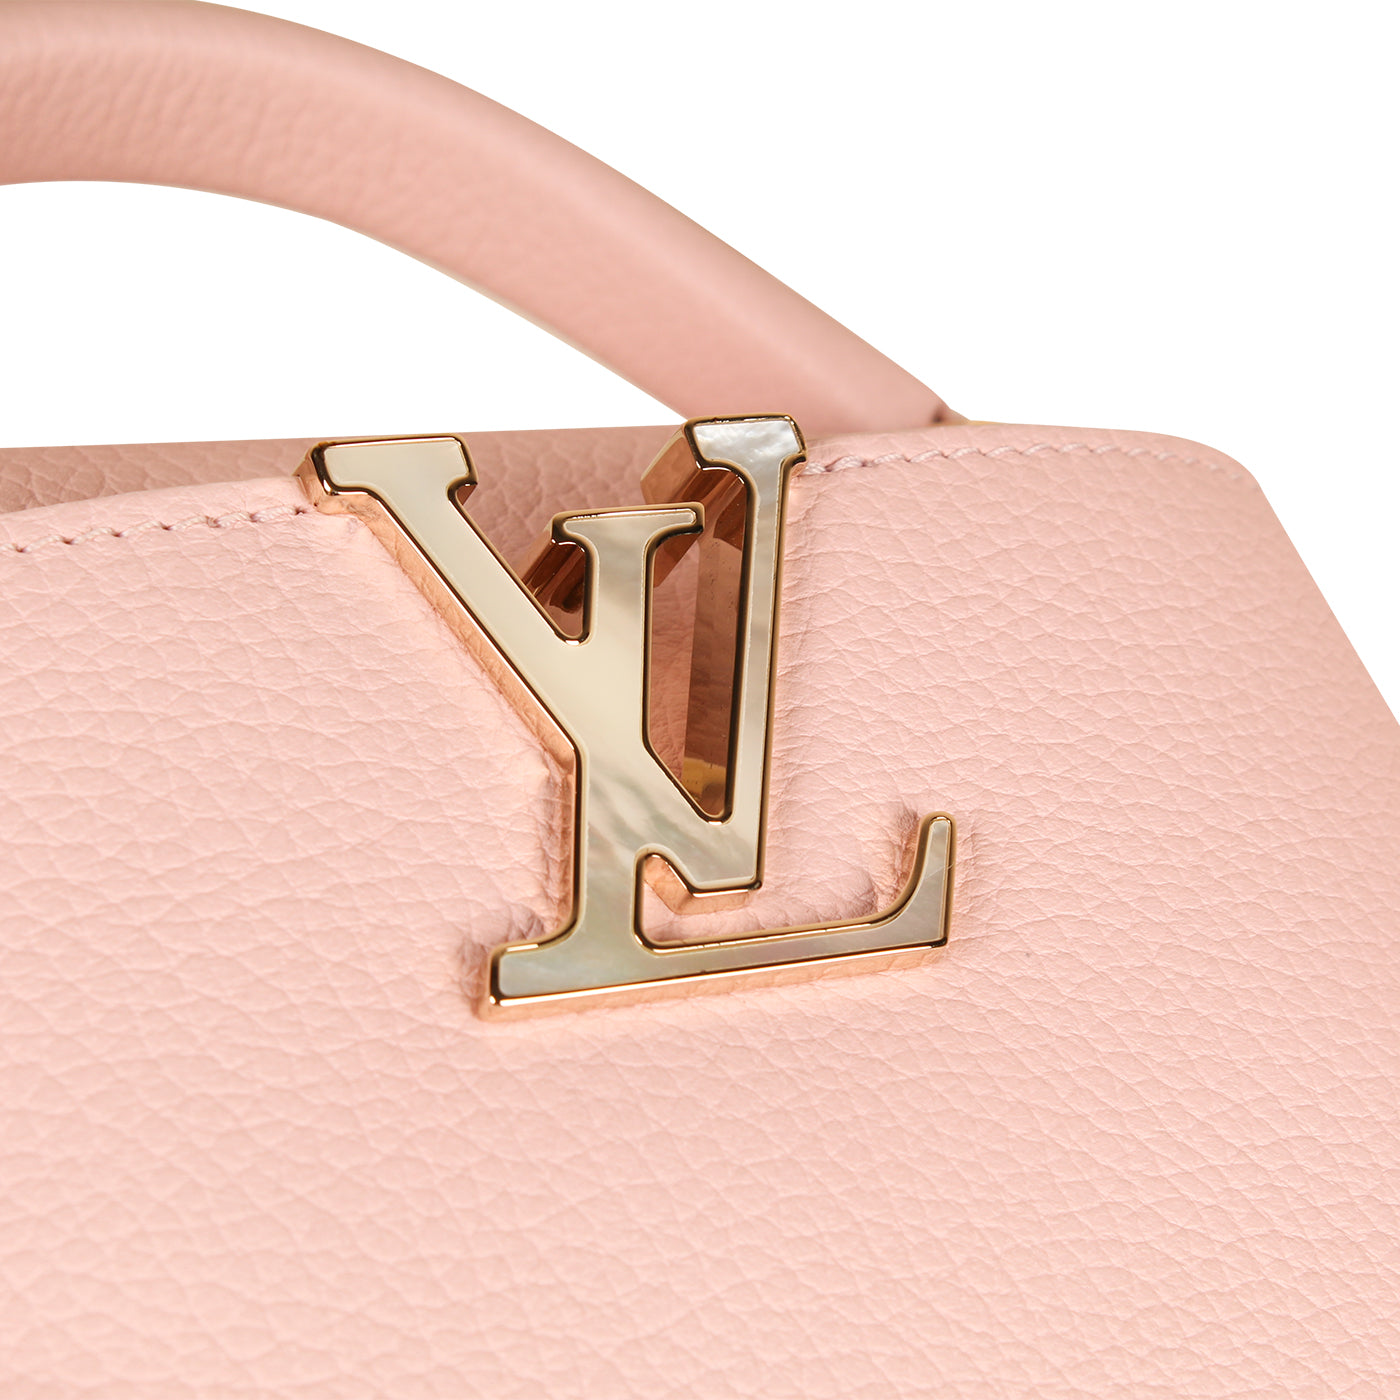 Louis Vuitton LV by The Pool Capucines Mini, Pink, One Size